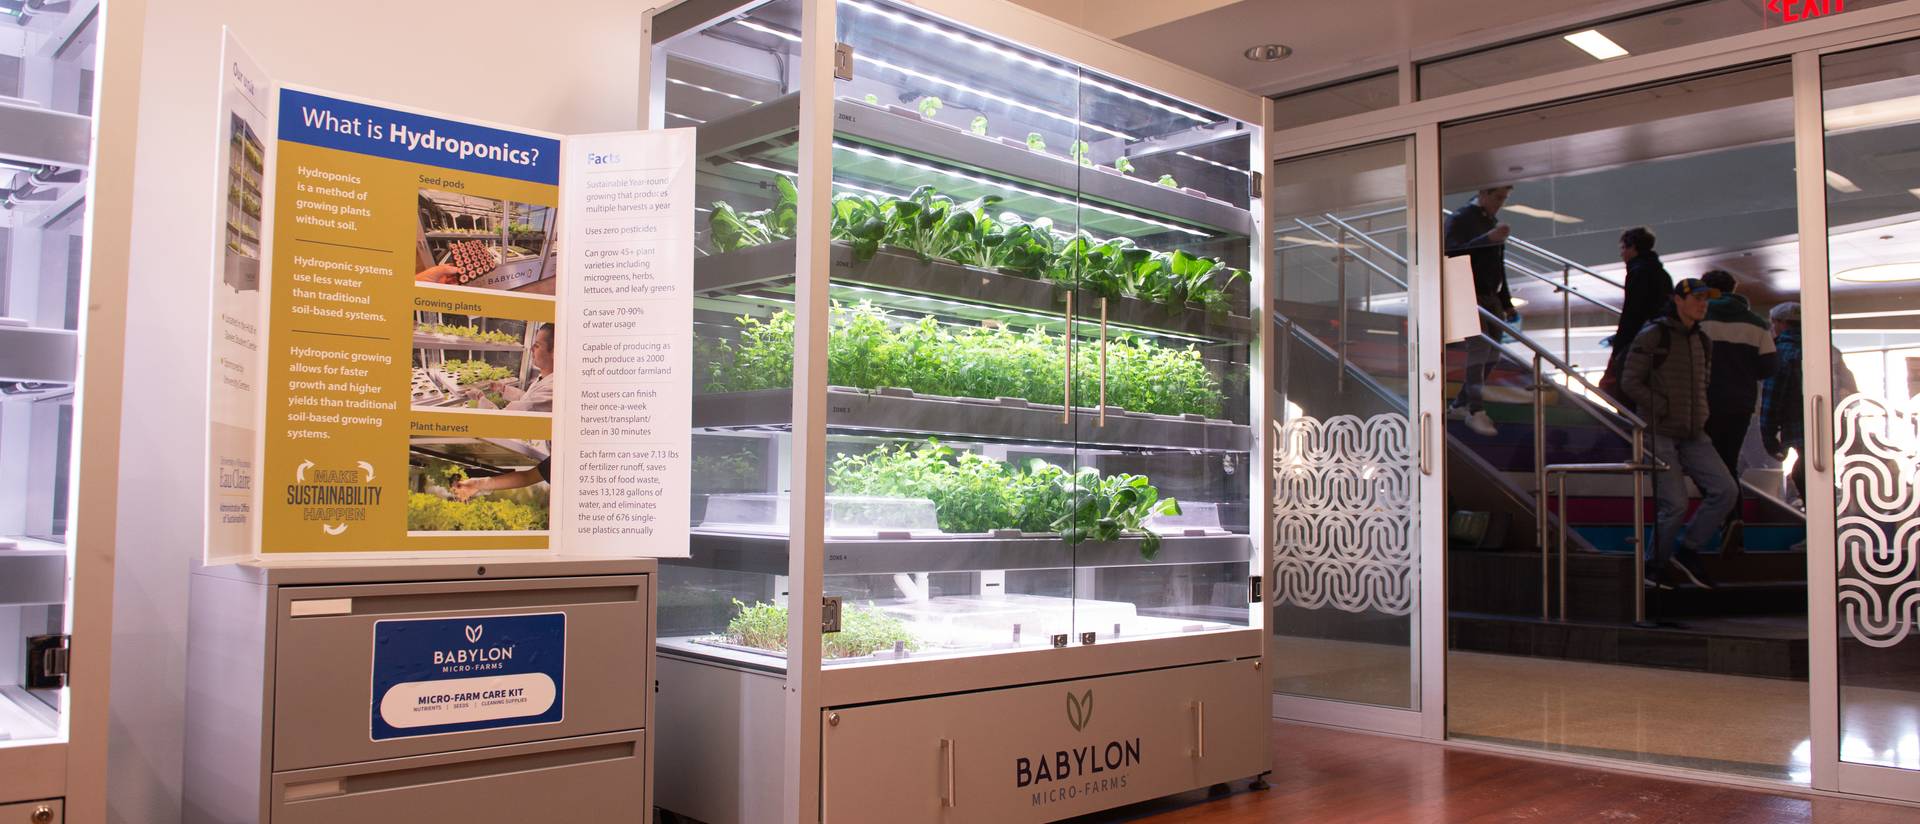 A picture of two large rectangular hydroponics units in the HUB in Davies. They are clear glass with five levels of plants growing in them.